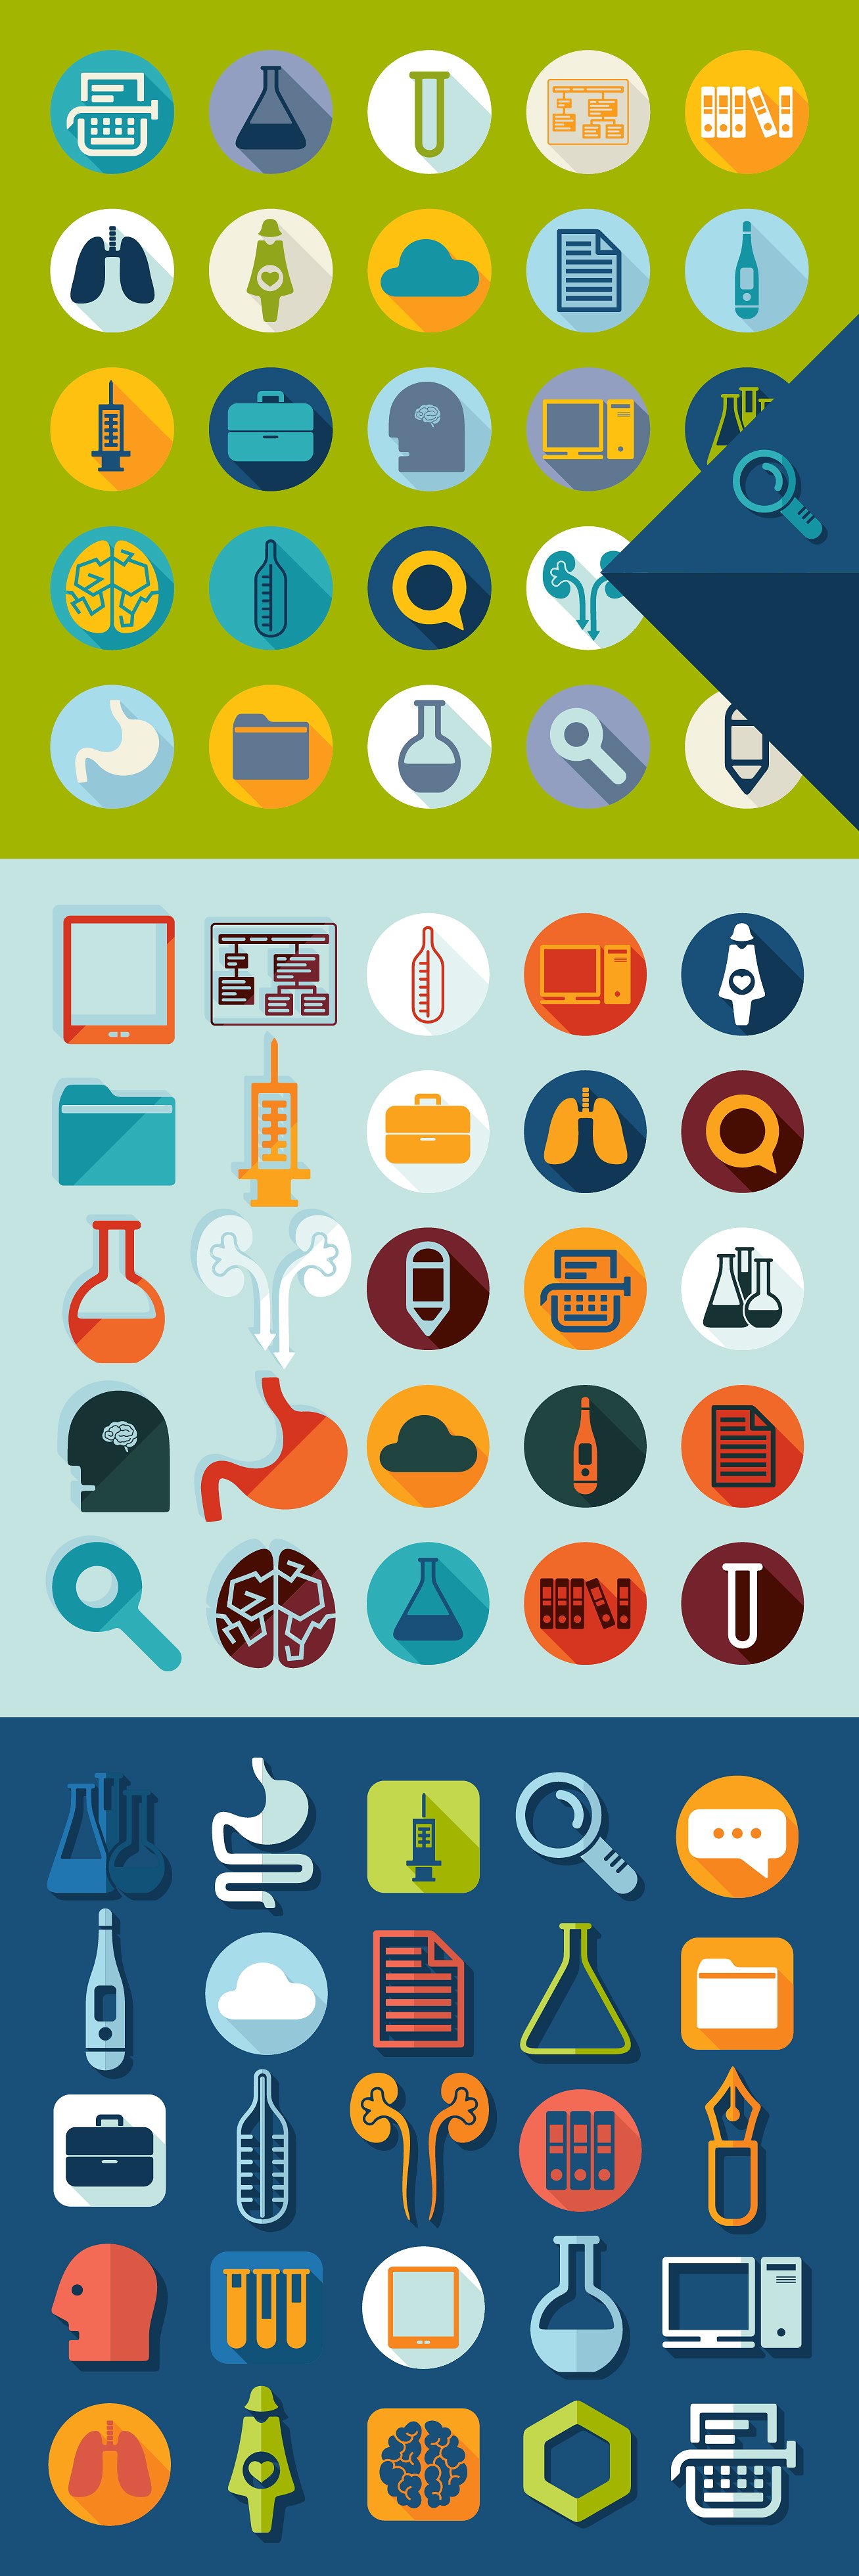 9 MEDICAL sets of icons